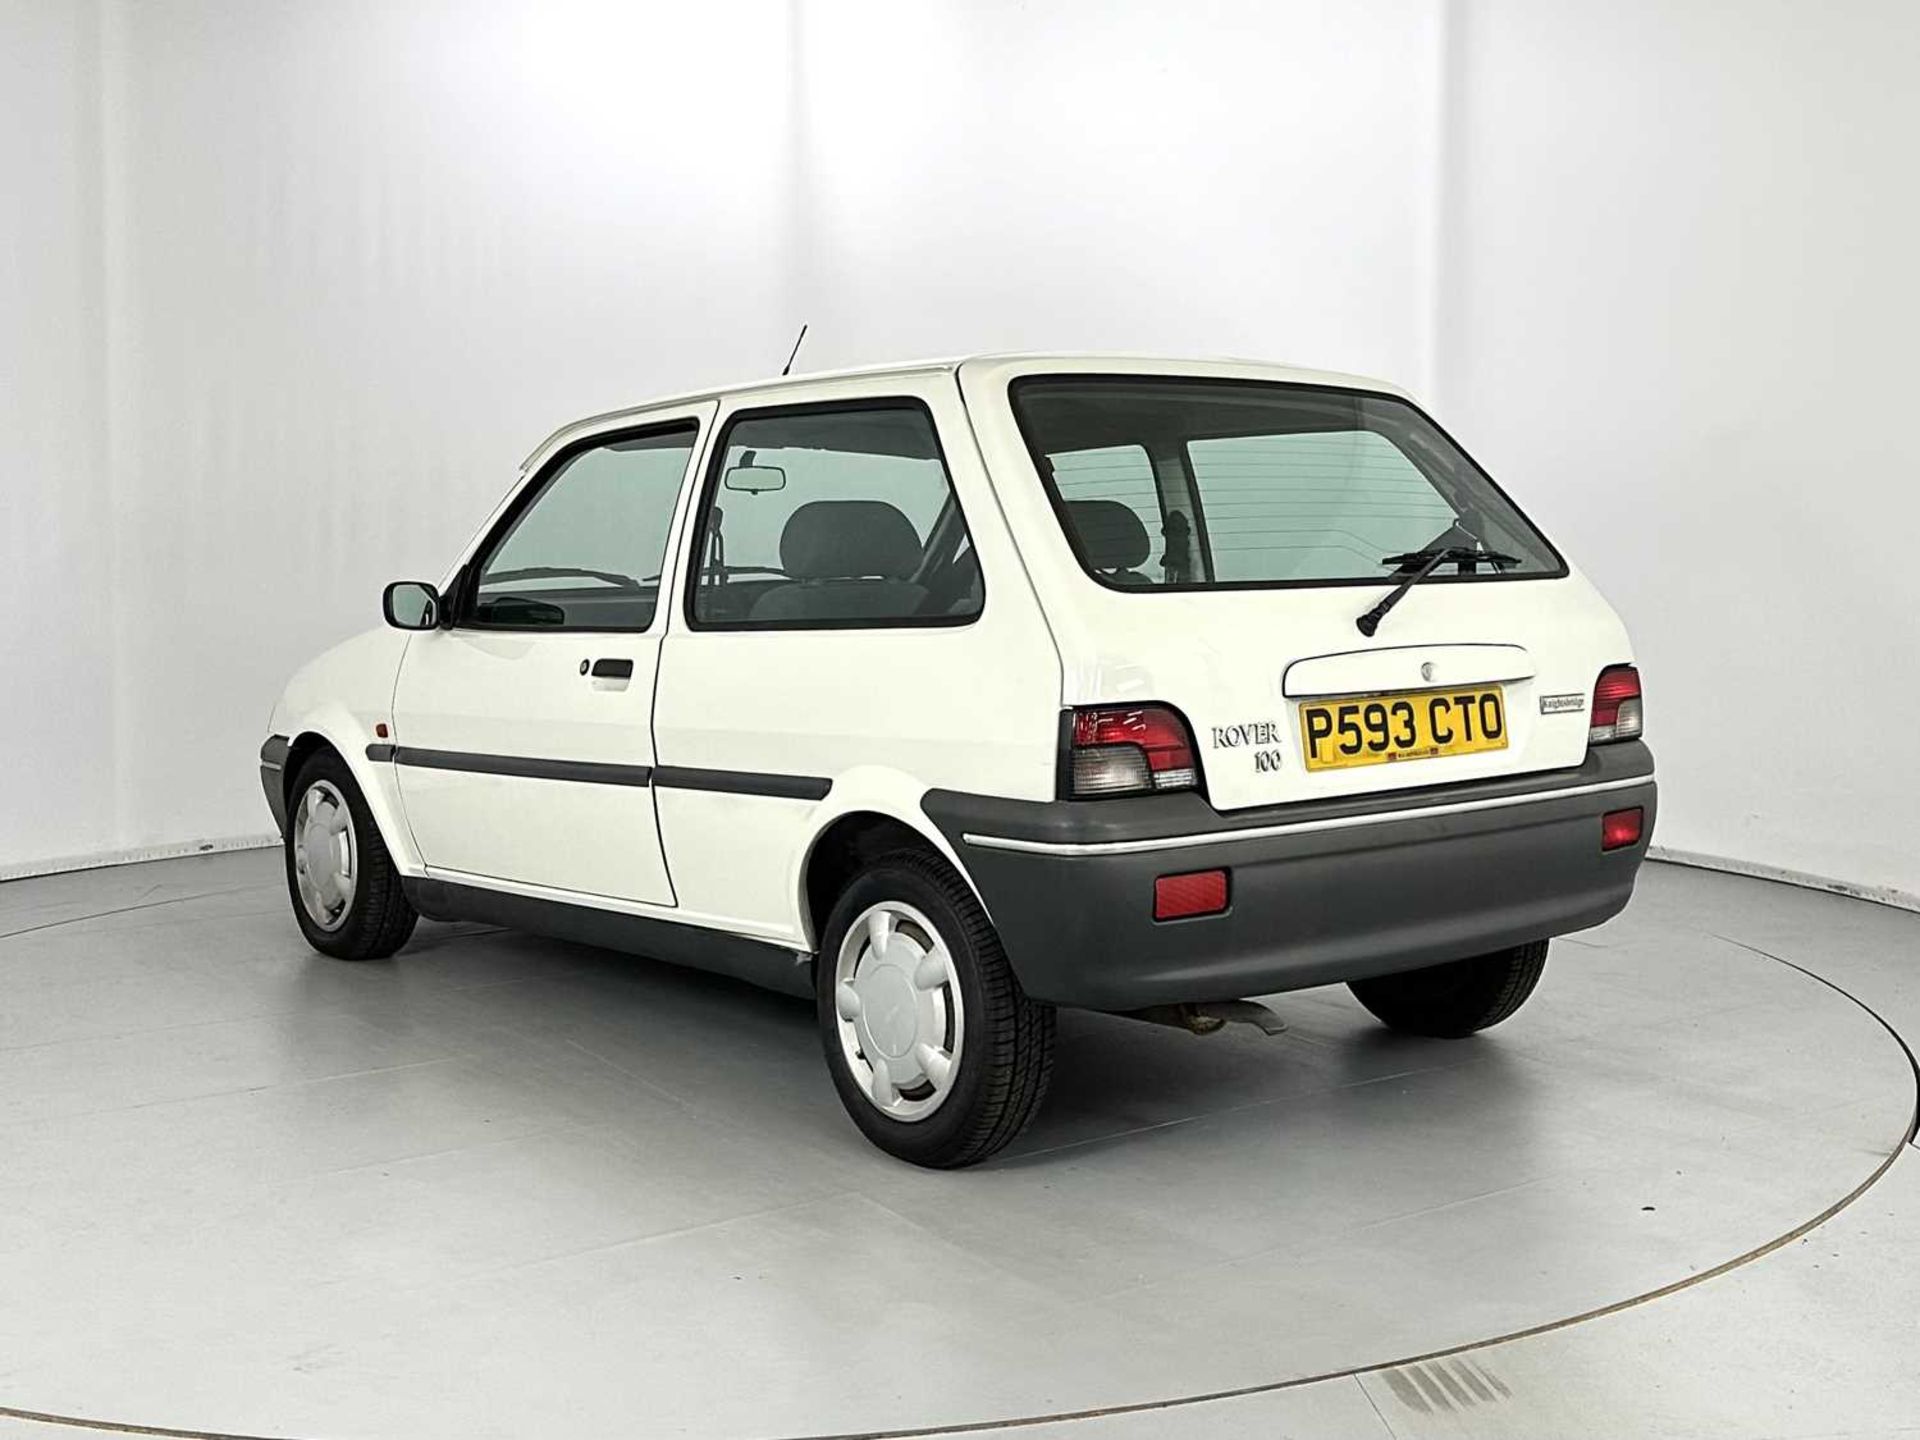 1996 Rover Metro - NO RESERVE 13,000 miles! - Image 7 of 29